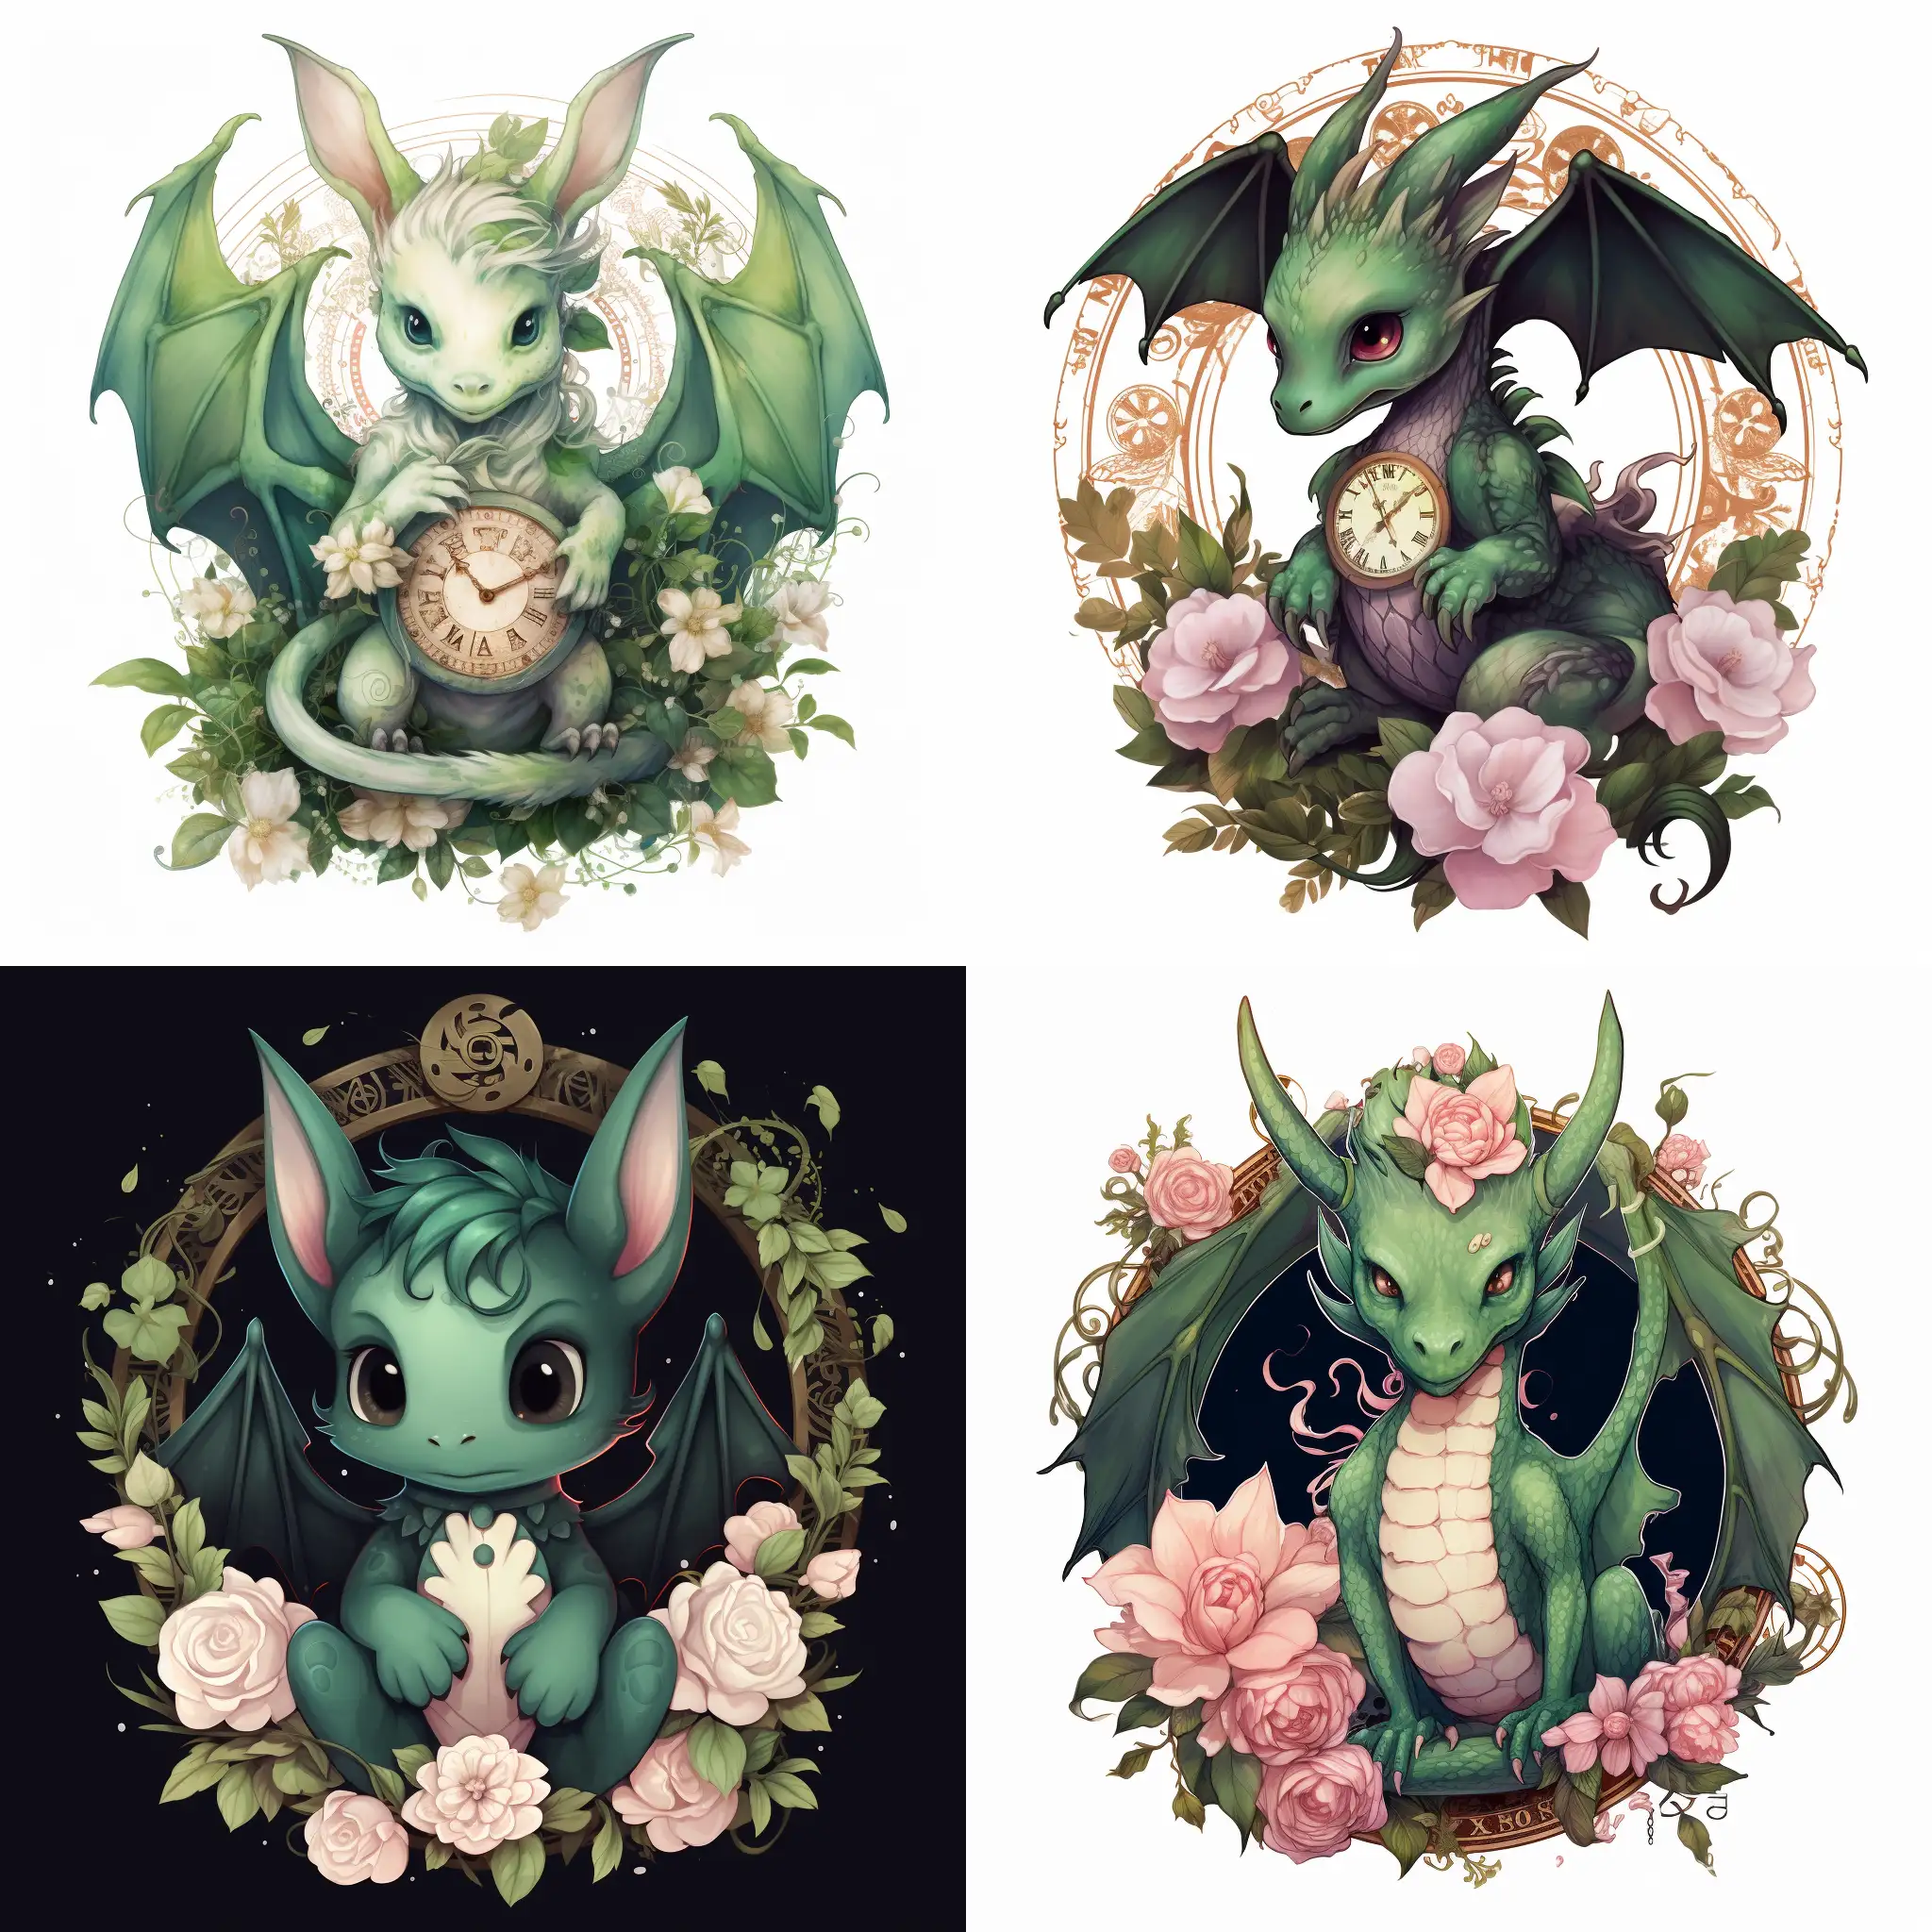 Enchanting-AnimeStyle-Baby-Dragon-with-Floral-Elegance